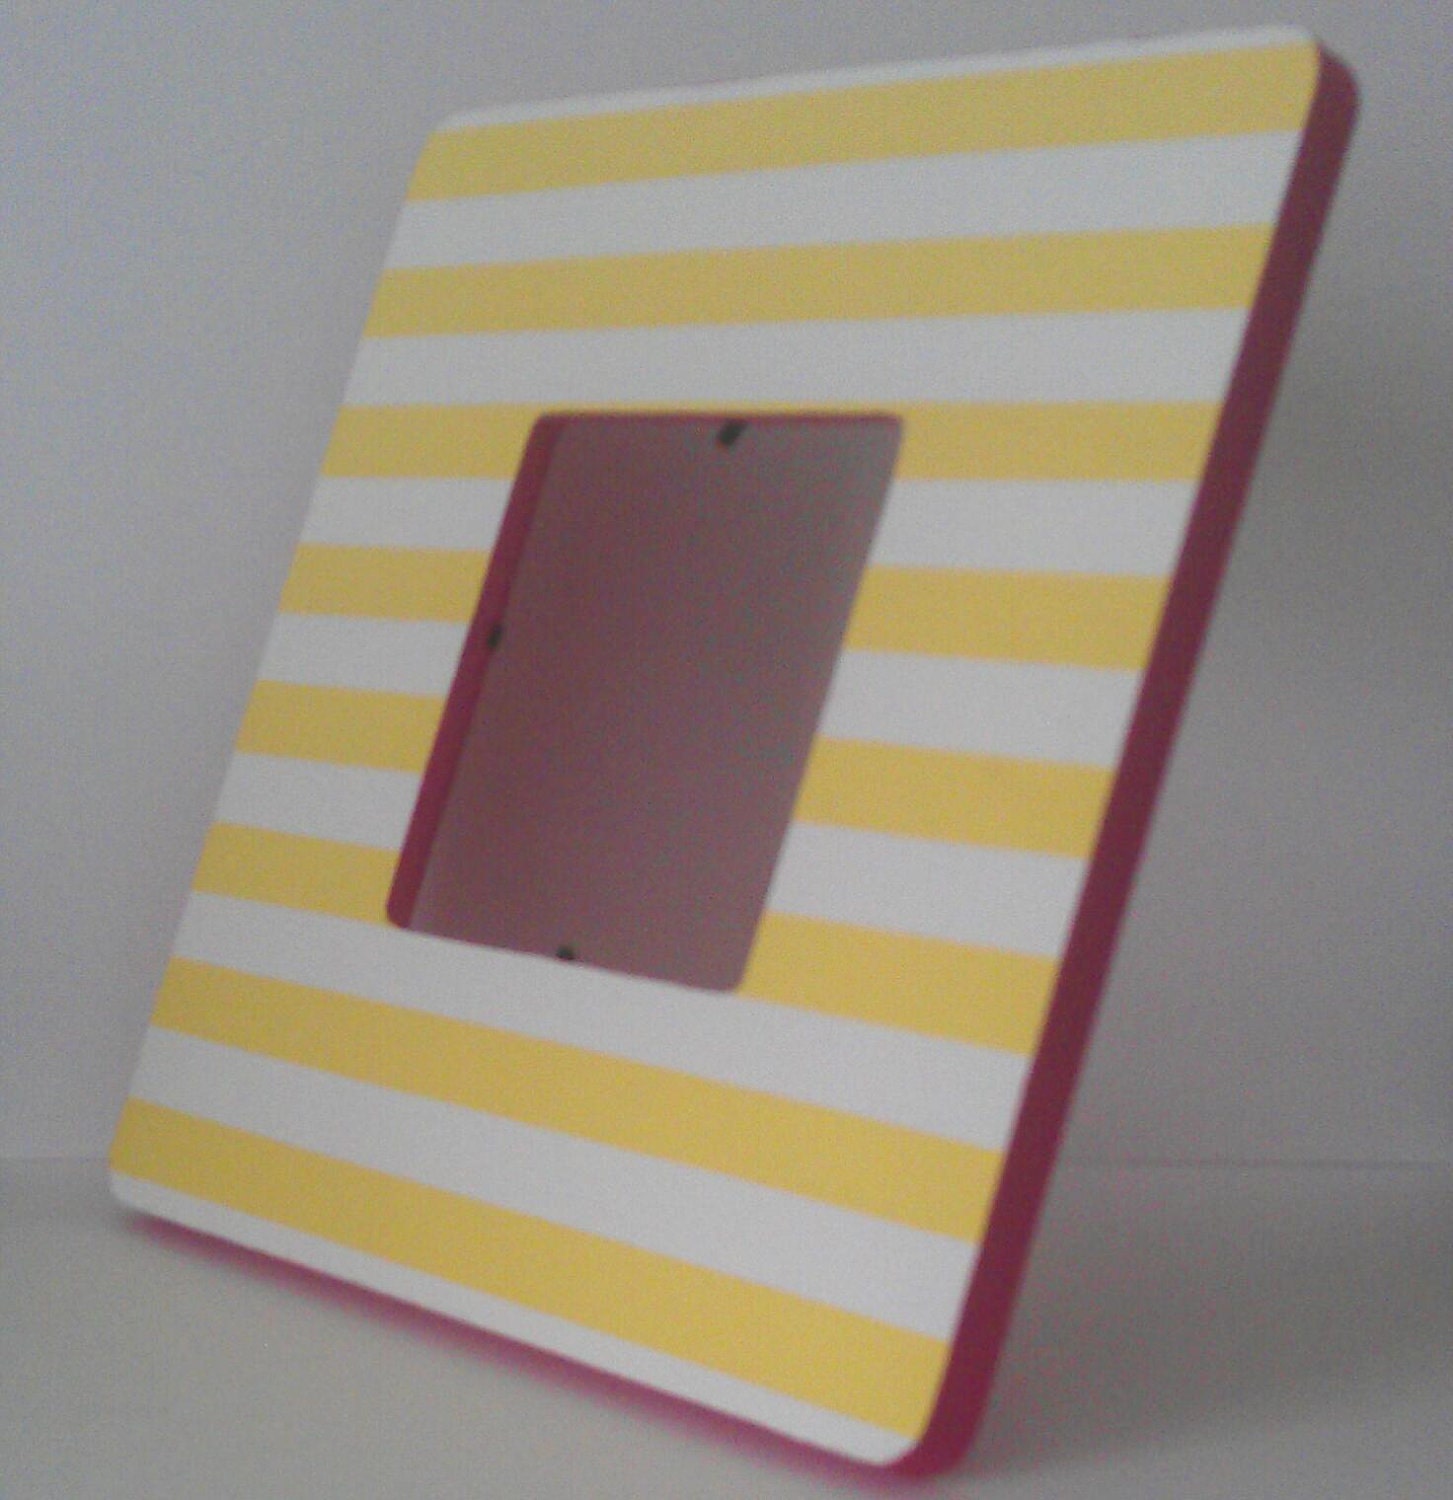 Hand-painted Yellow and White Striped Picture Frame